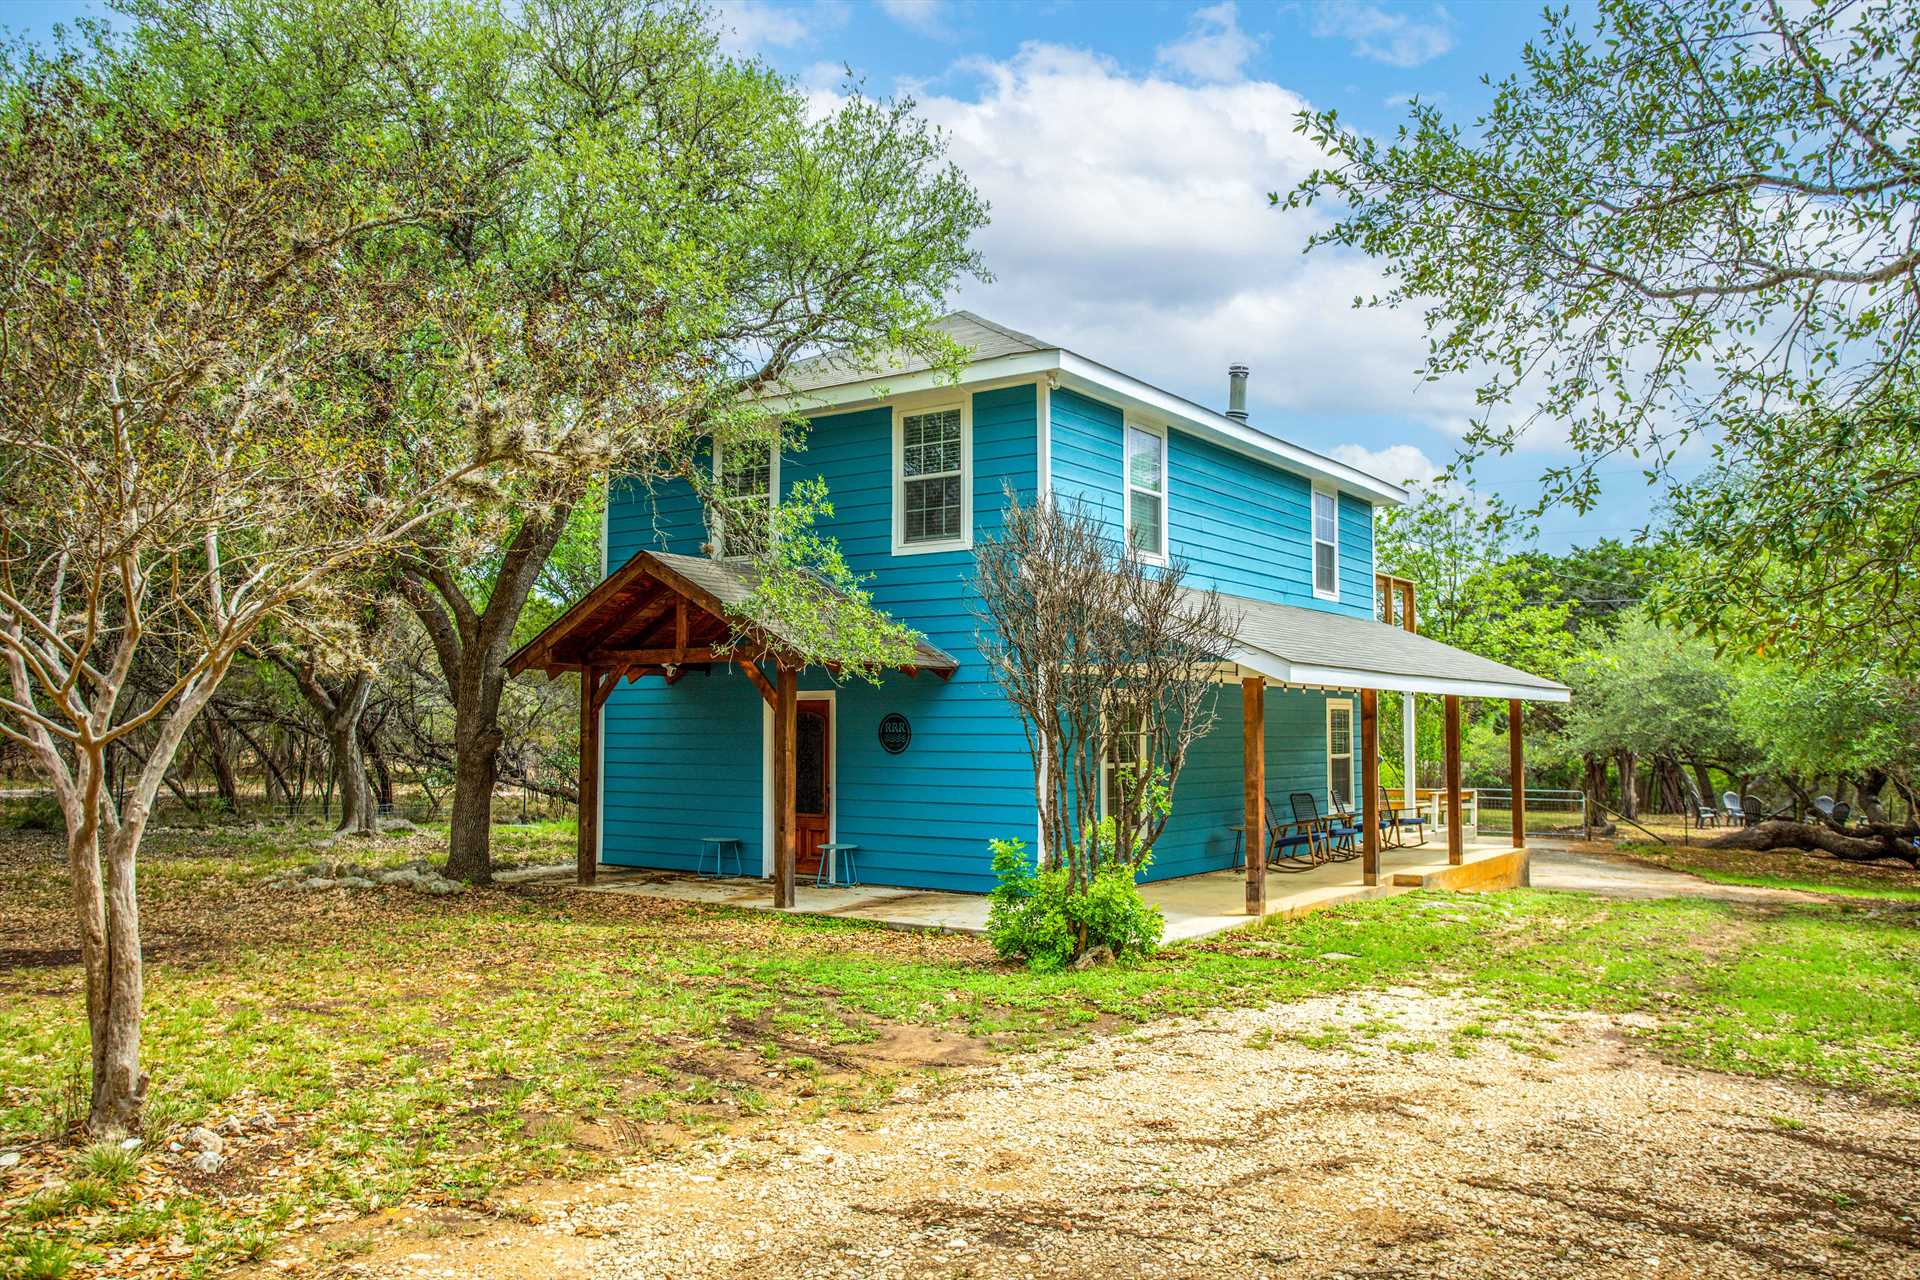                                                 This beautiful sky-blue guest home sits so peacefully in the country, it's hard to believe it's just a few miles from Bandera!